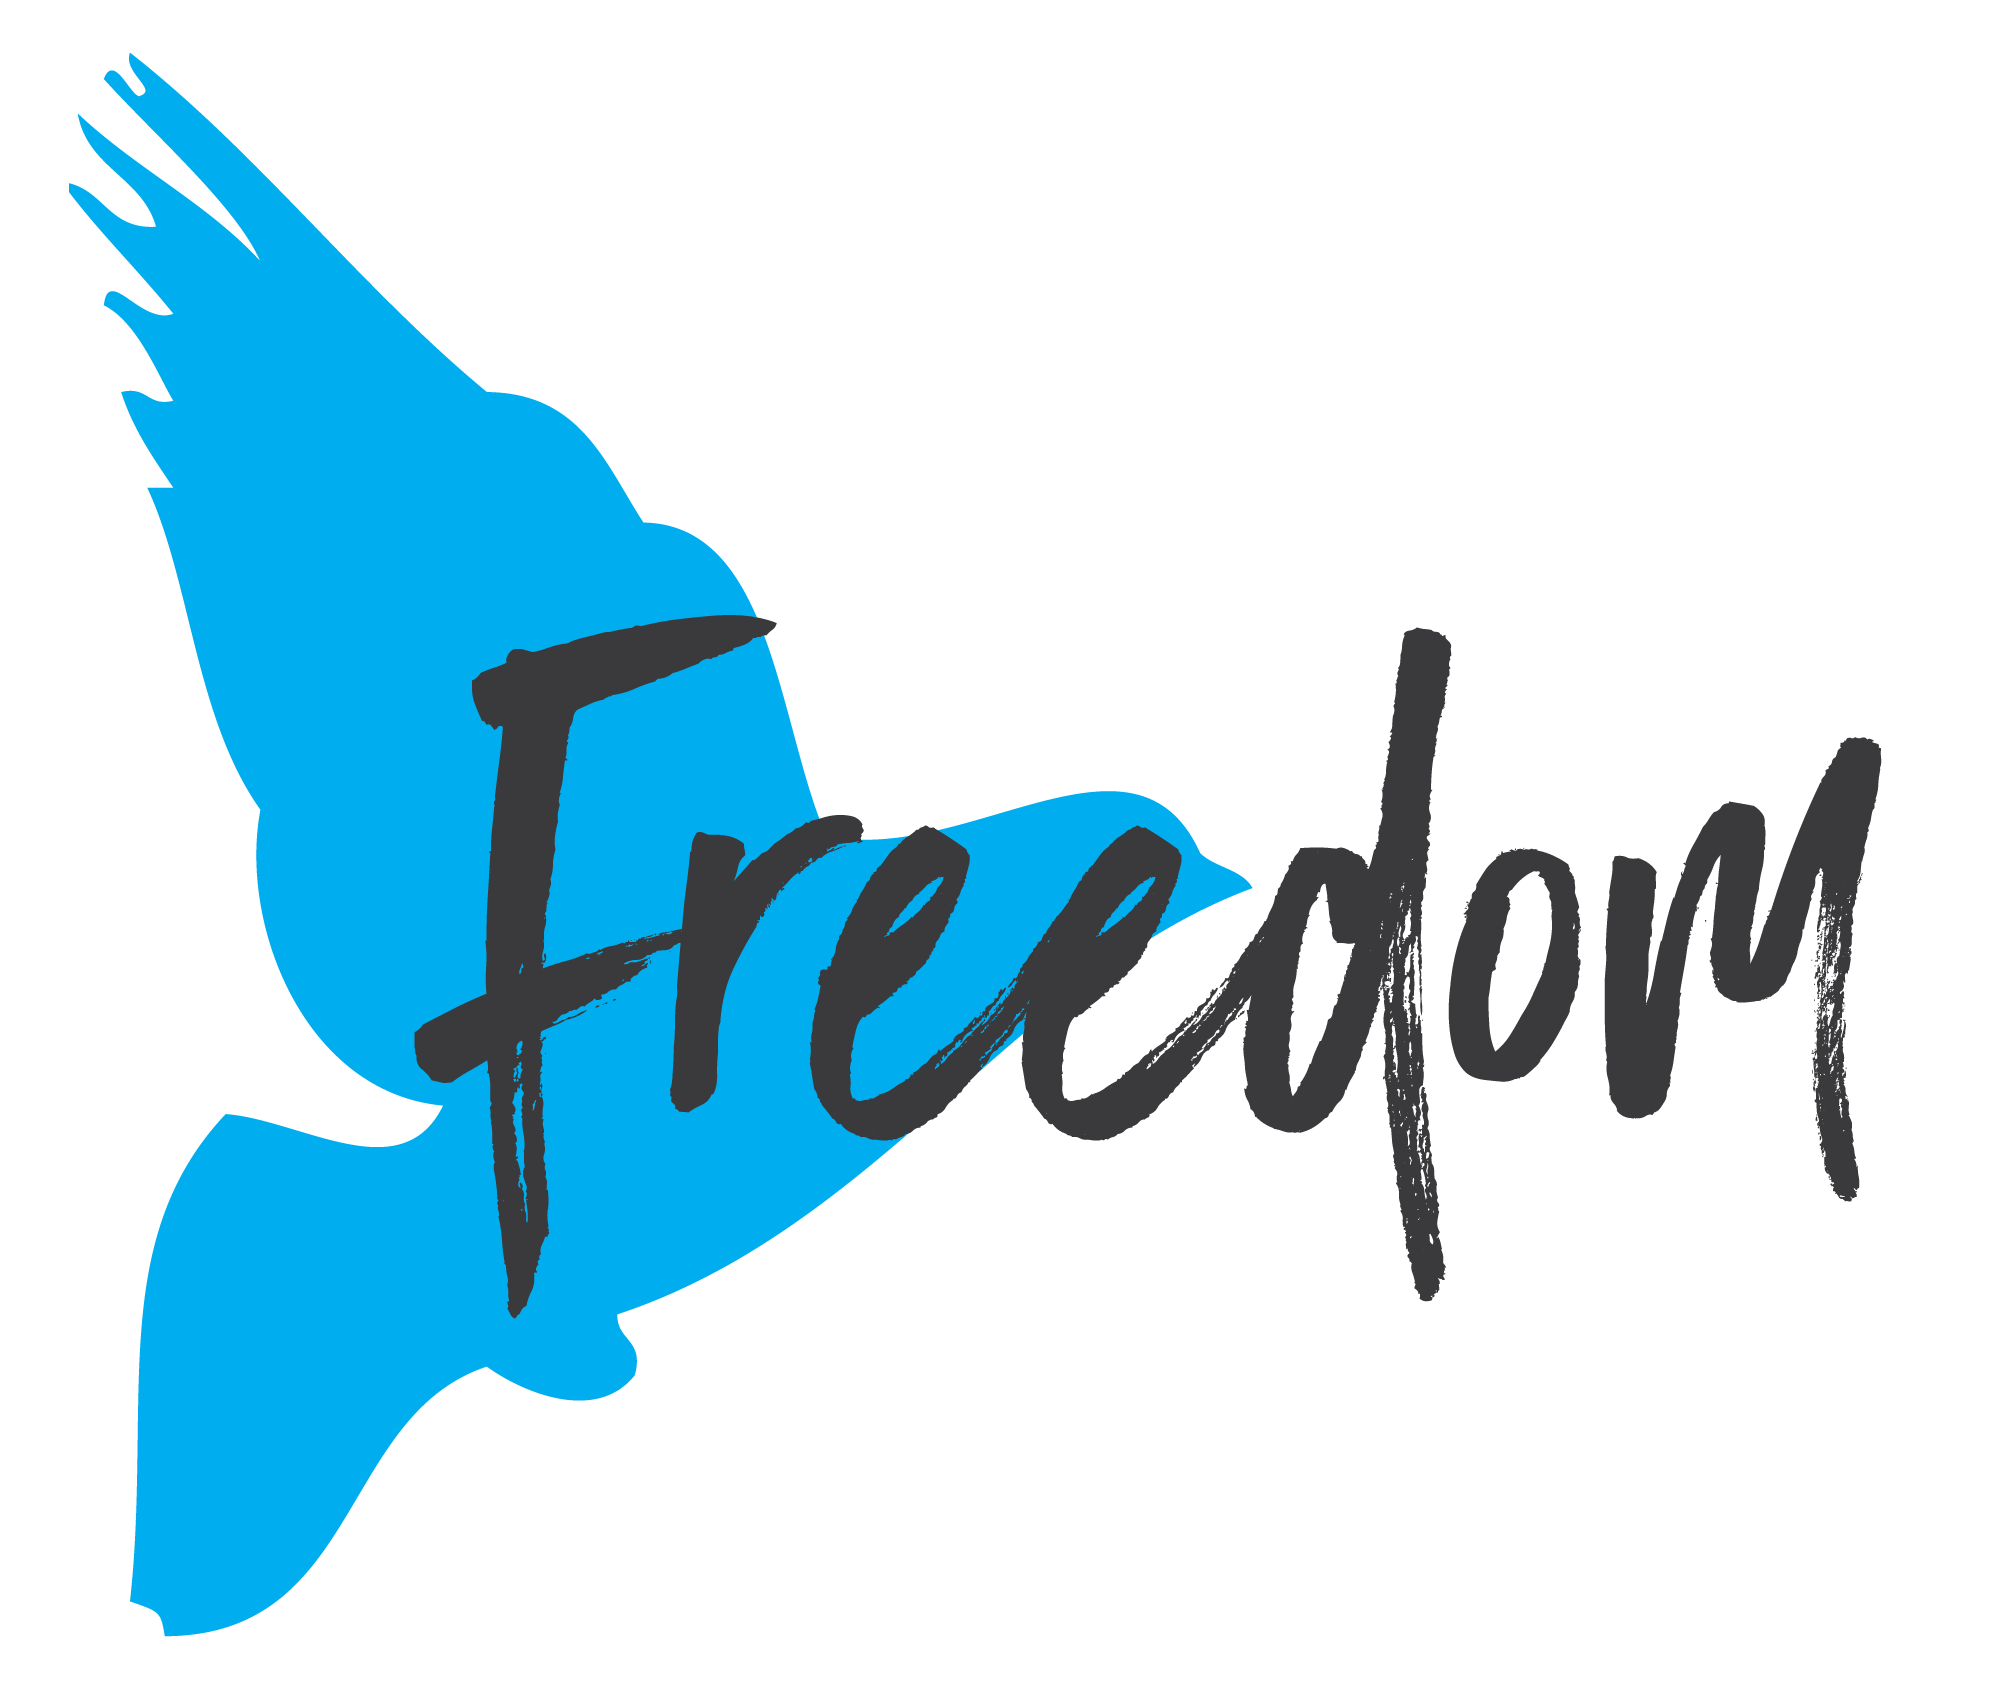 Freedom clipart individual freedom. 